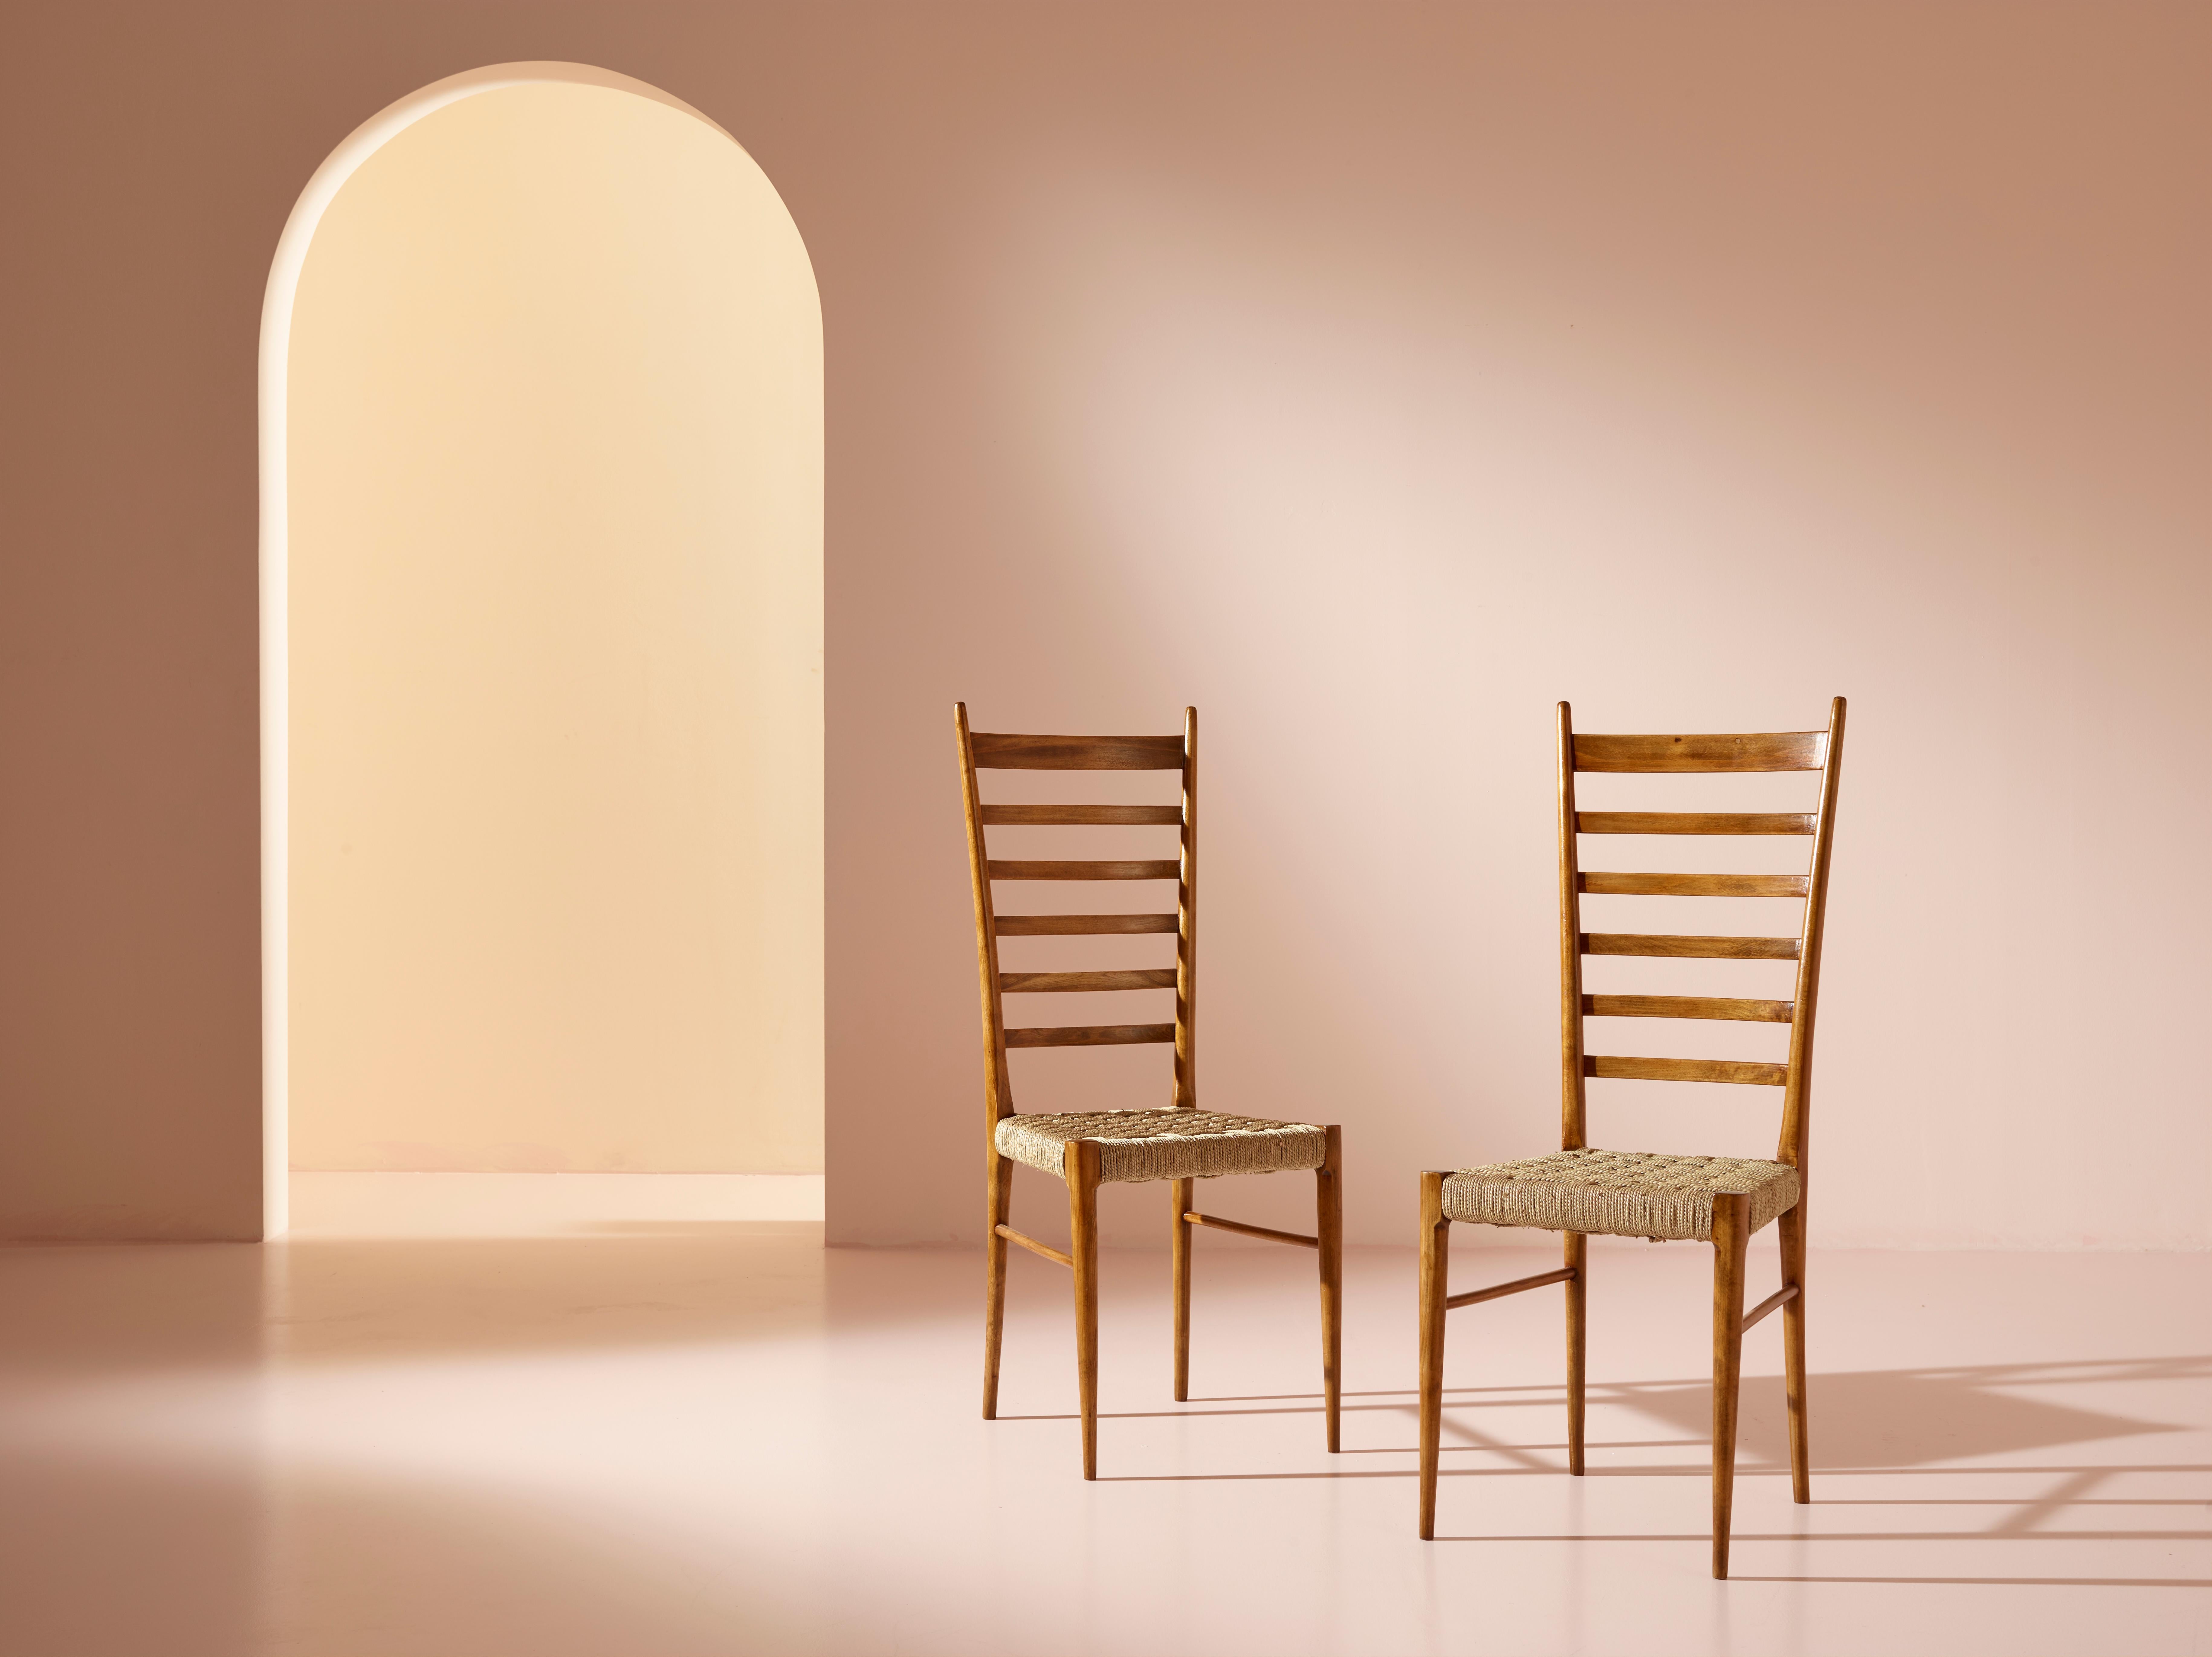 A rare set of ''Chiavarine'' chairs model Sei Stecche (six rods) presents itself as a remarkable testament to the exquisite craftsmanship of Colombo Sanguineti in Chiavari during the 1950s.

These chairs, constructed with beech wood, exemplify a